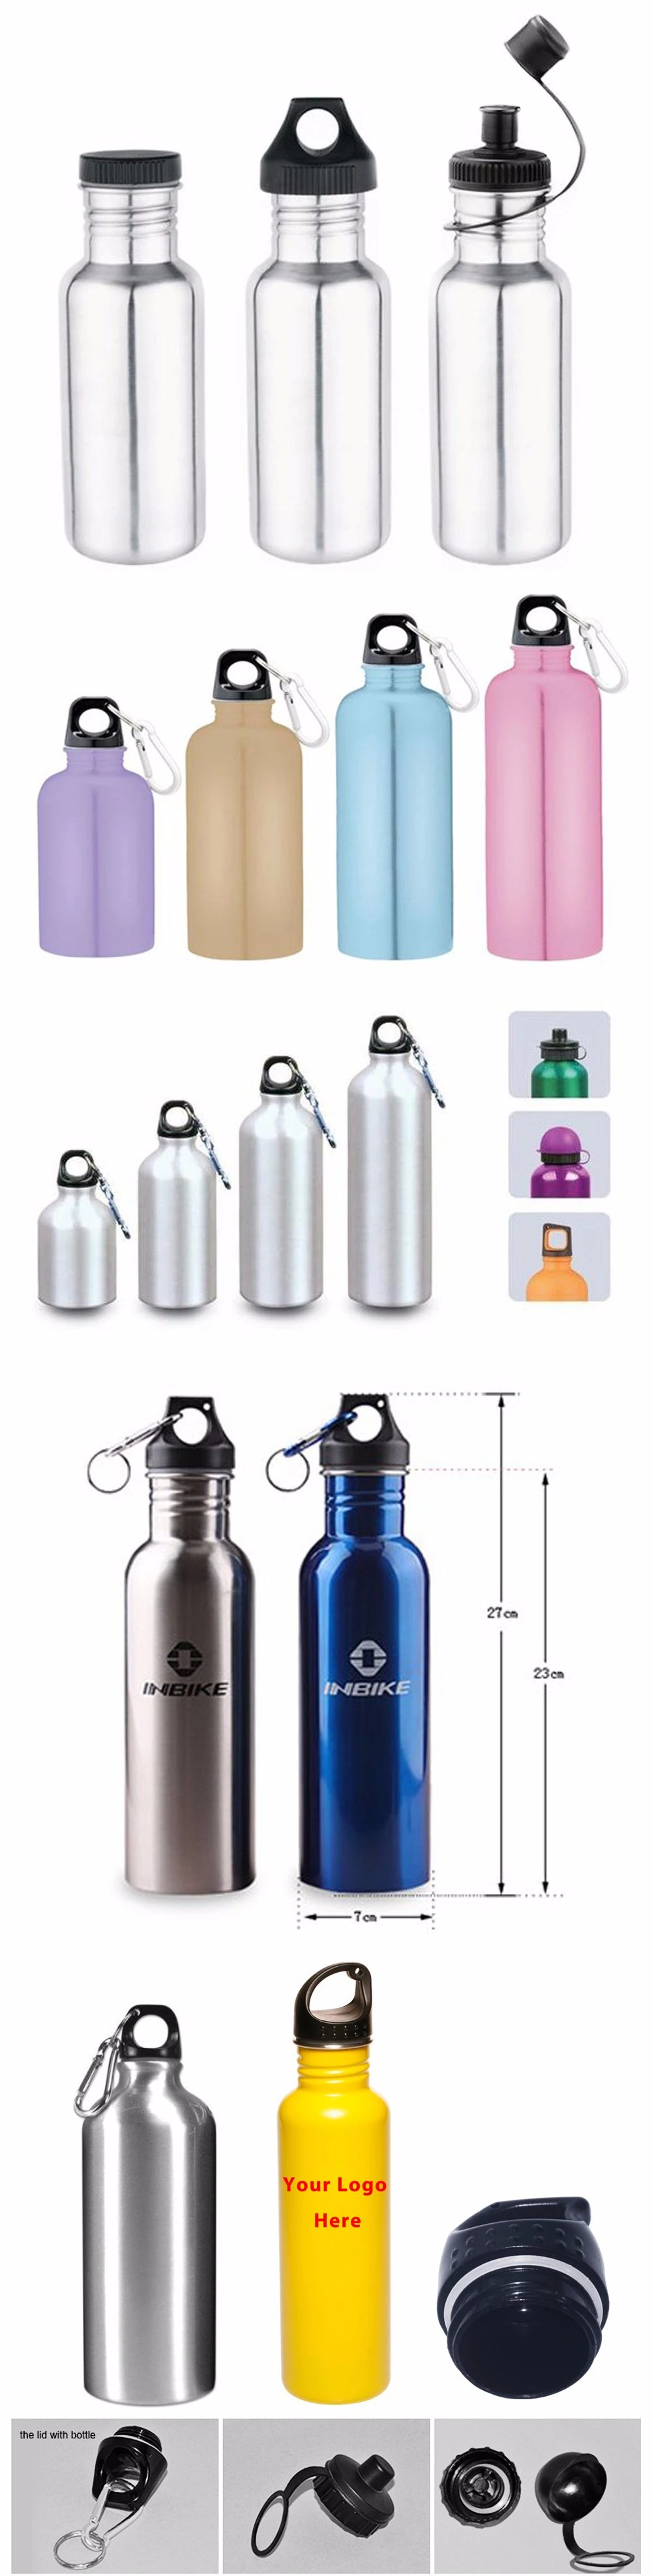 Corrosion Resistance Double Wall Stainless Steel Vacuum Flask Bottle